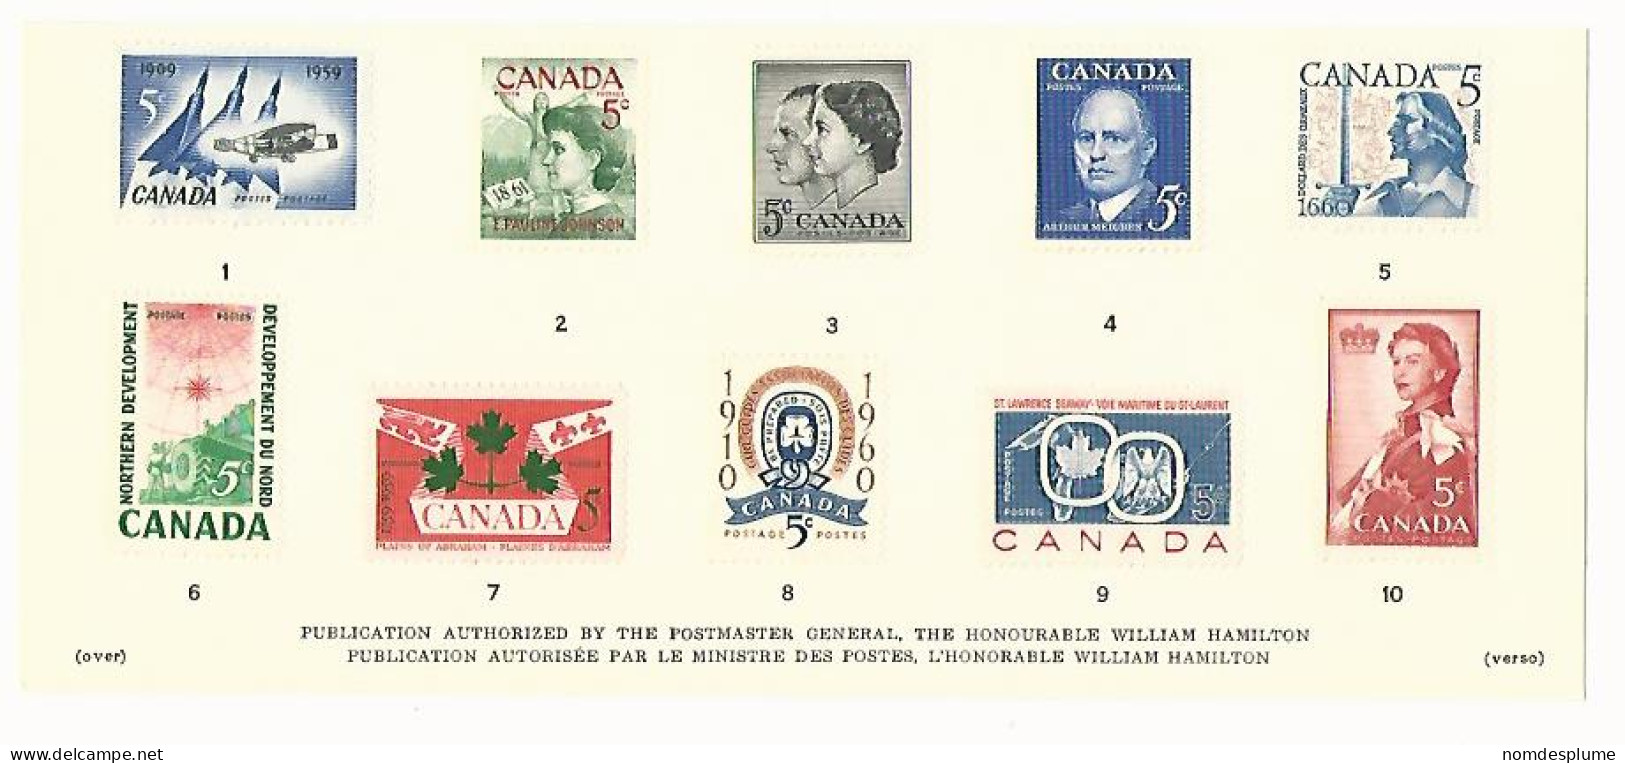 58193) Canada Commemorative Issues Canadian History In Postage Stamps Series #3 - Jahressätze Der Kanad. Post